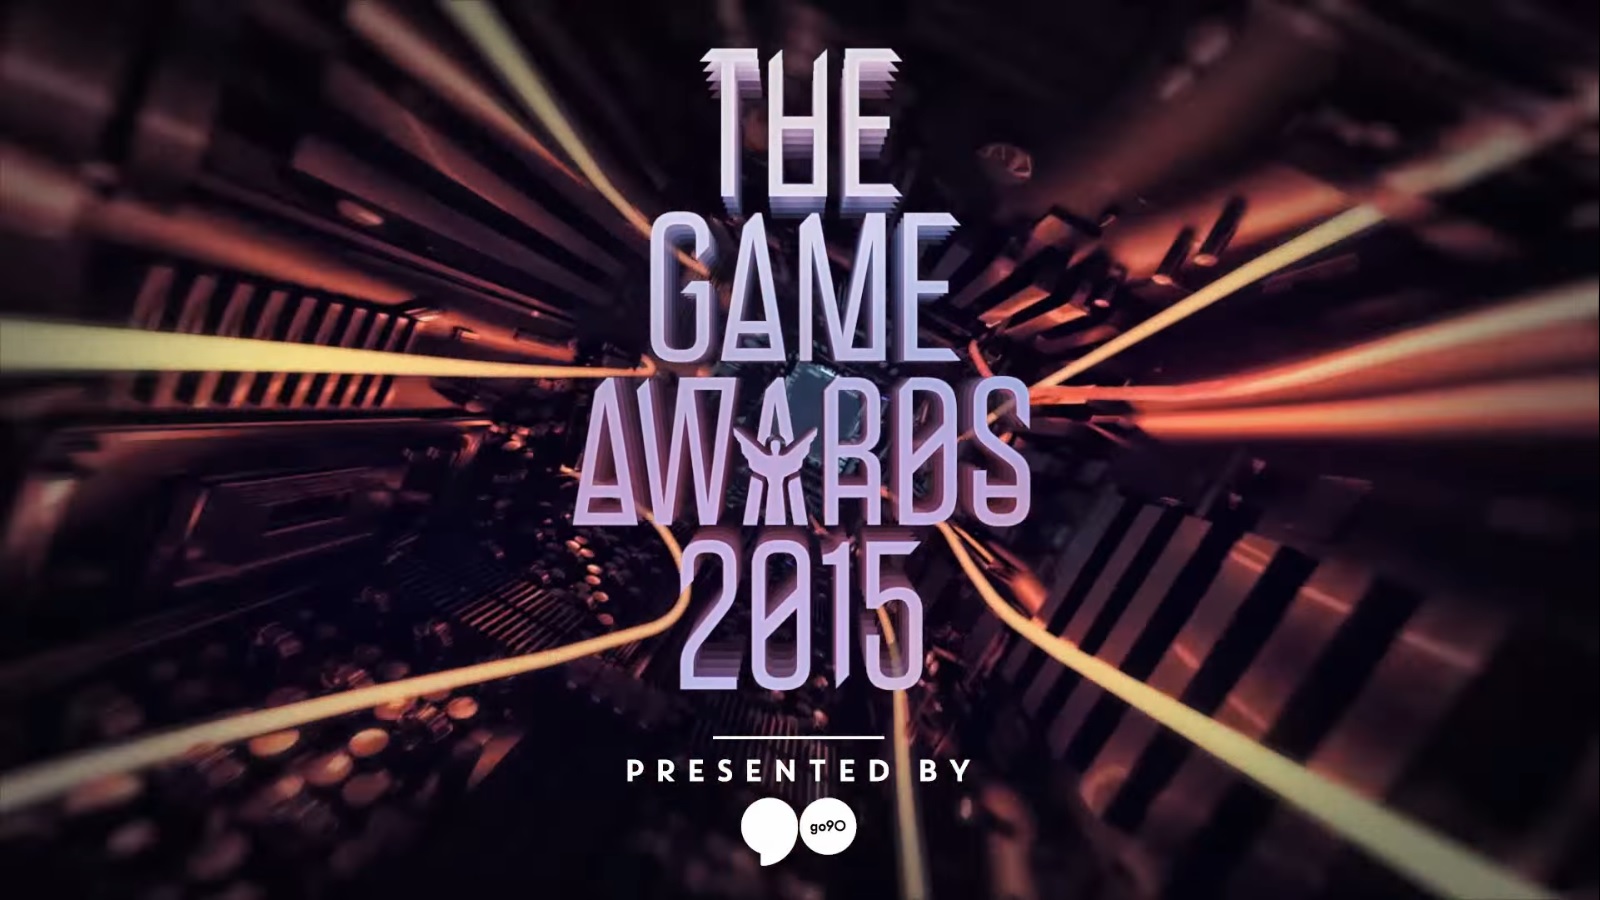 The Game Awards 2016 - Game of the Year Winner 